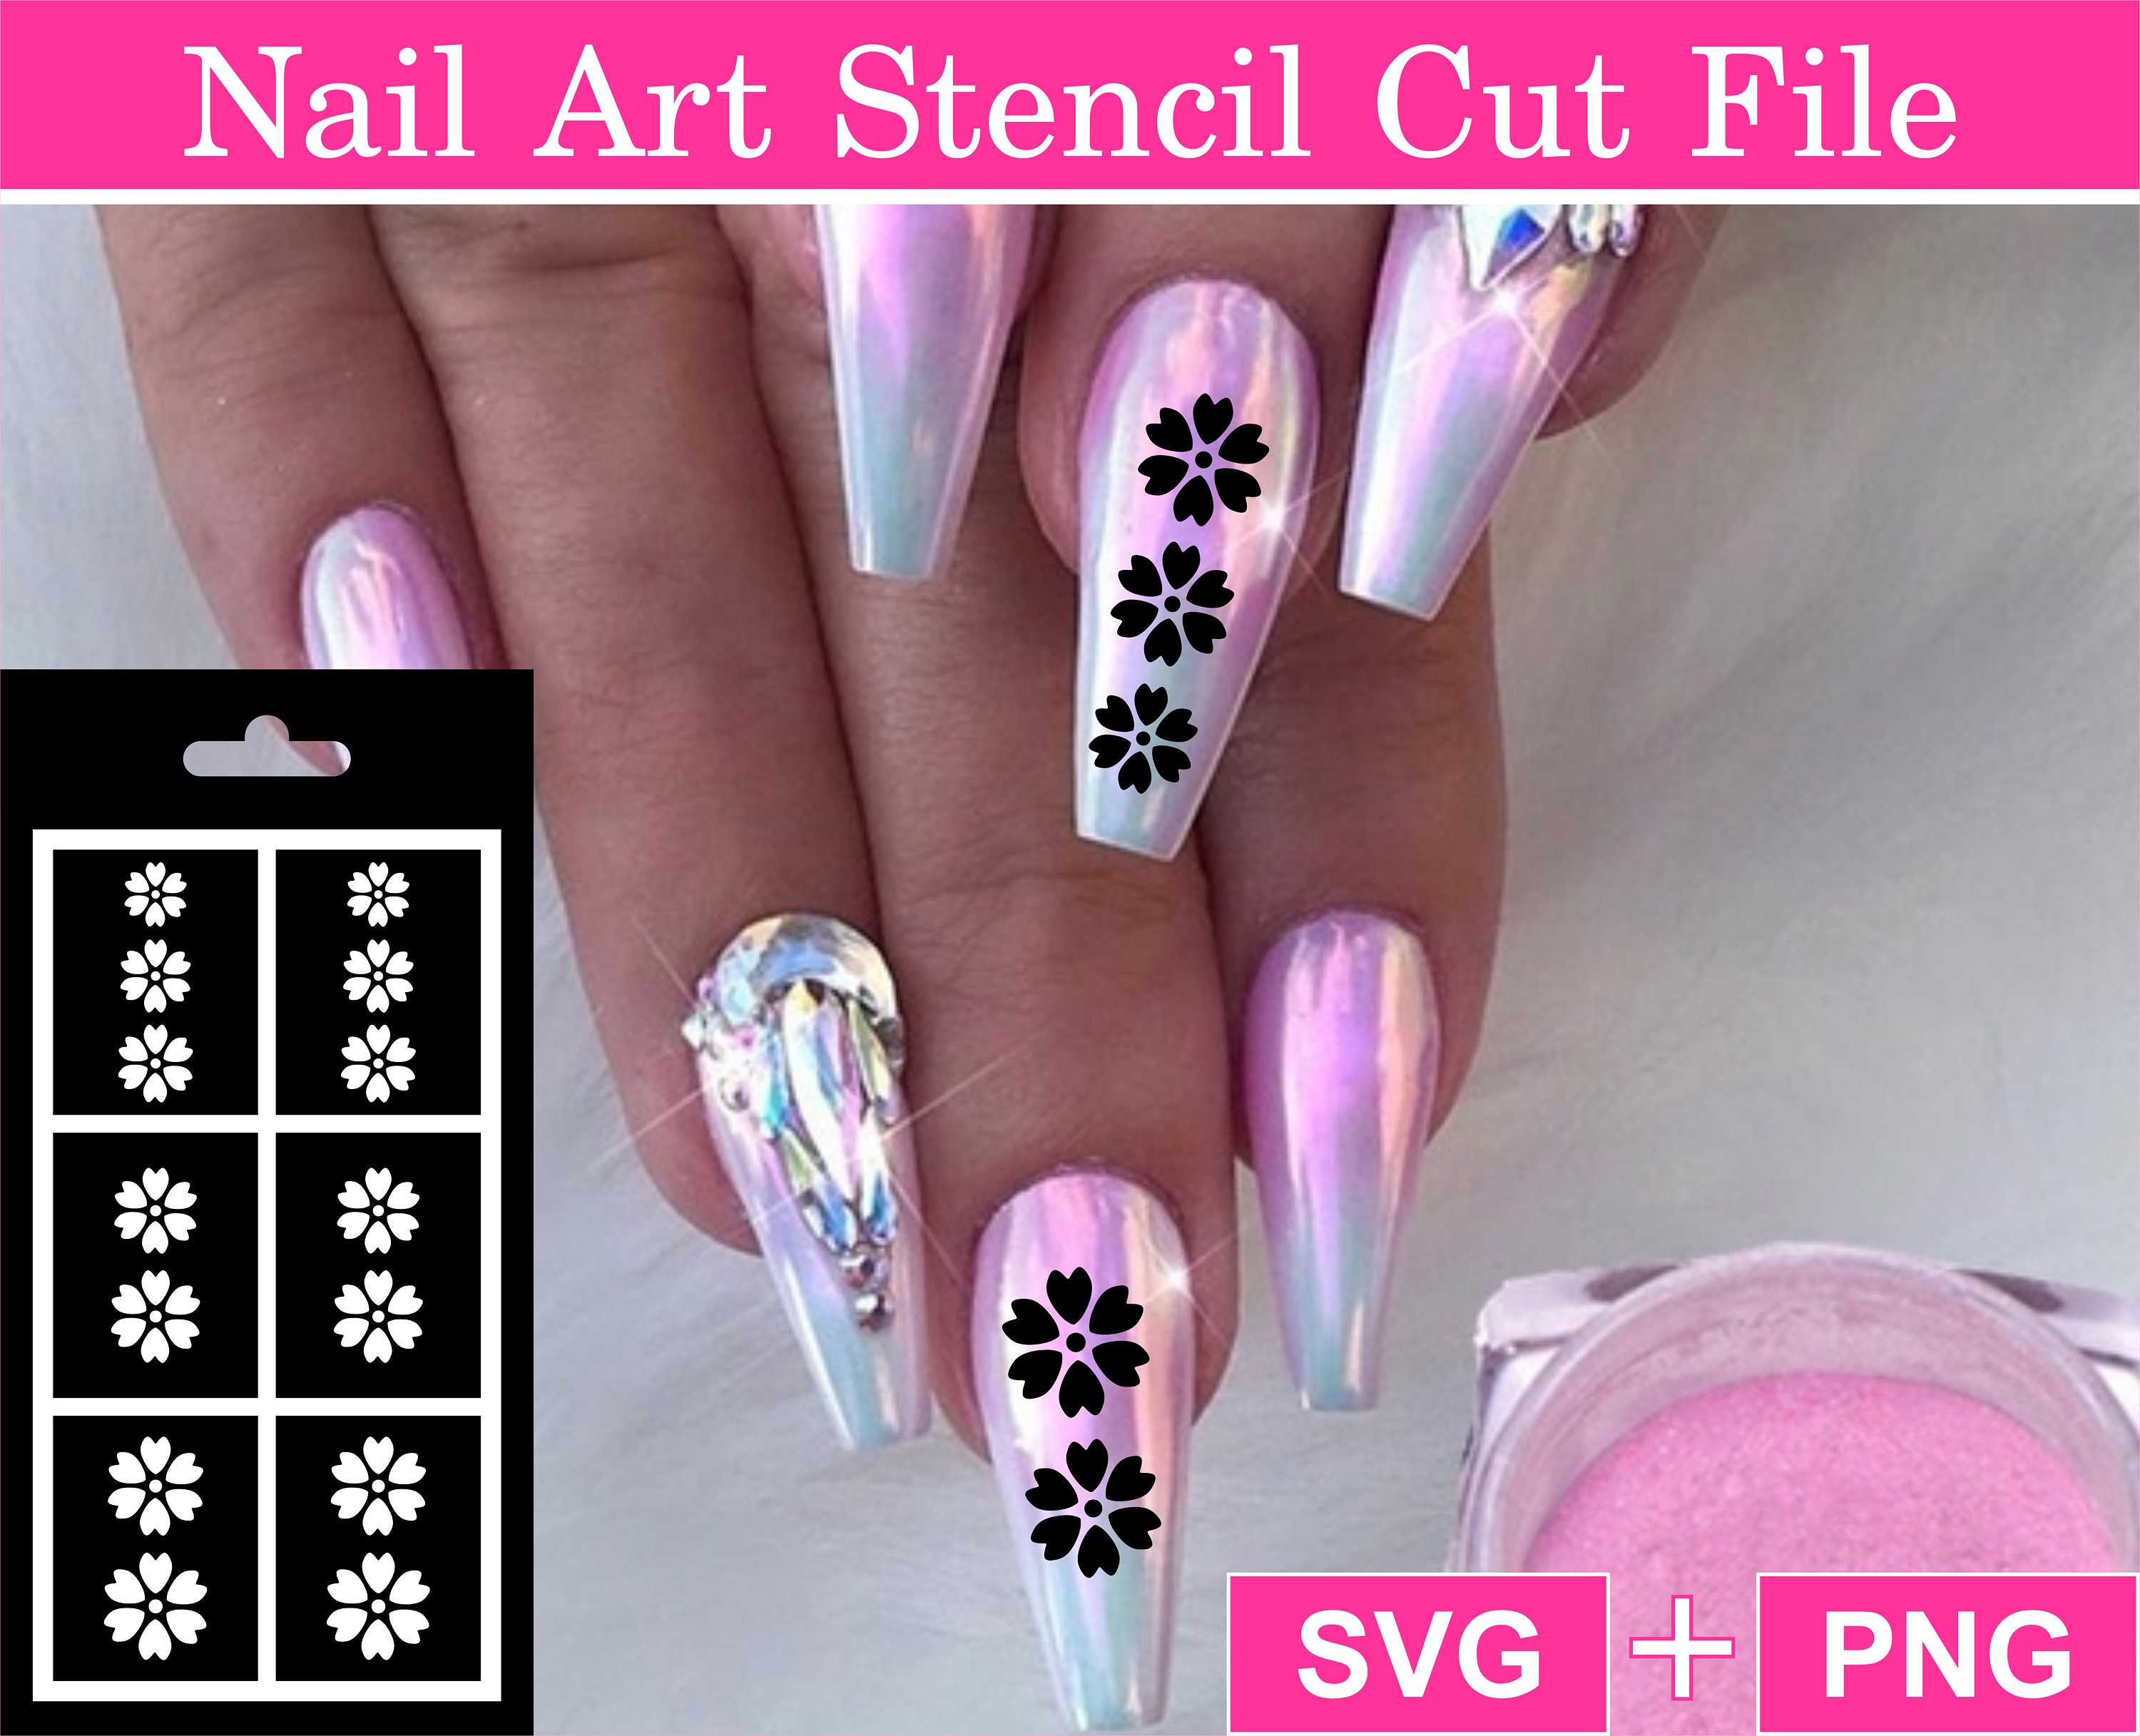 9. Nail Art Stencil Tape for French Manicures - wide 7